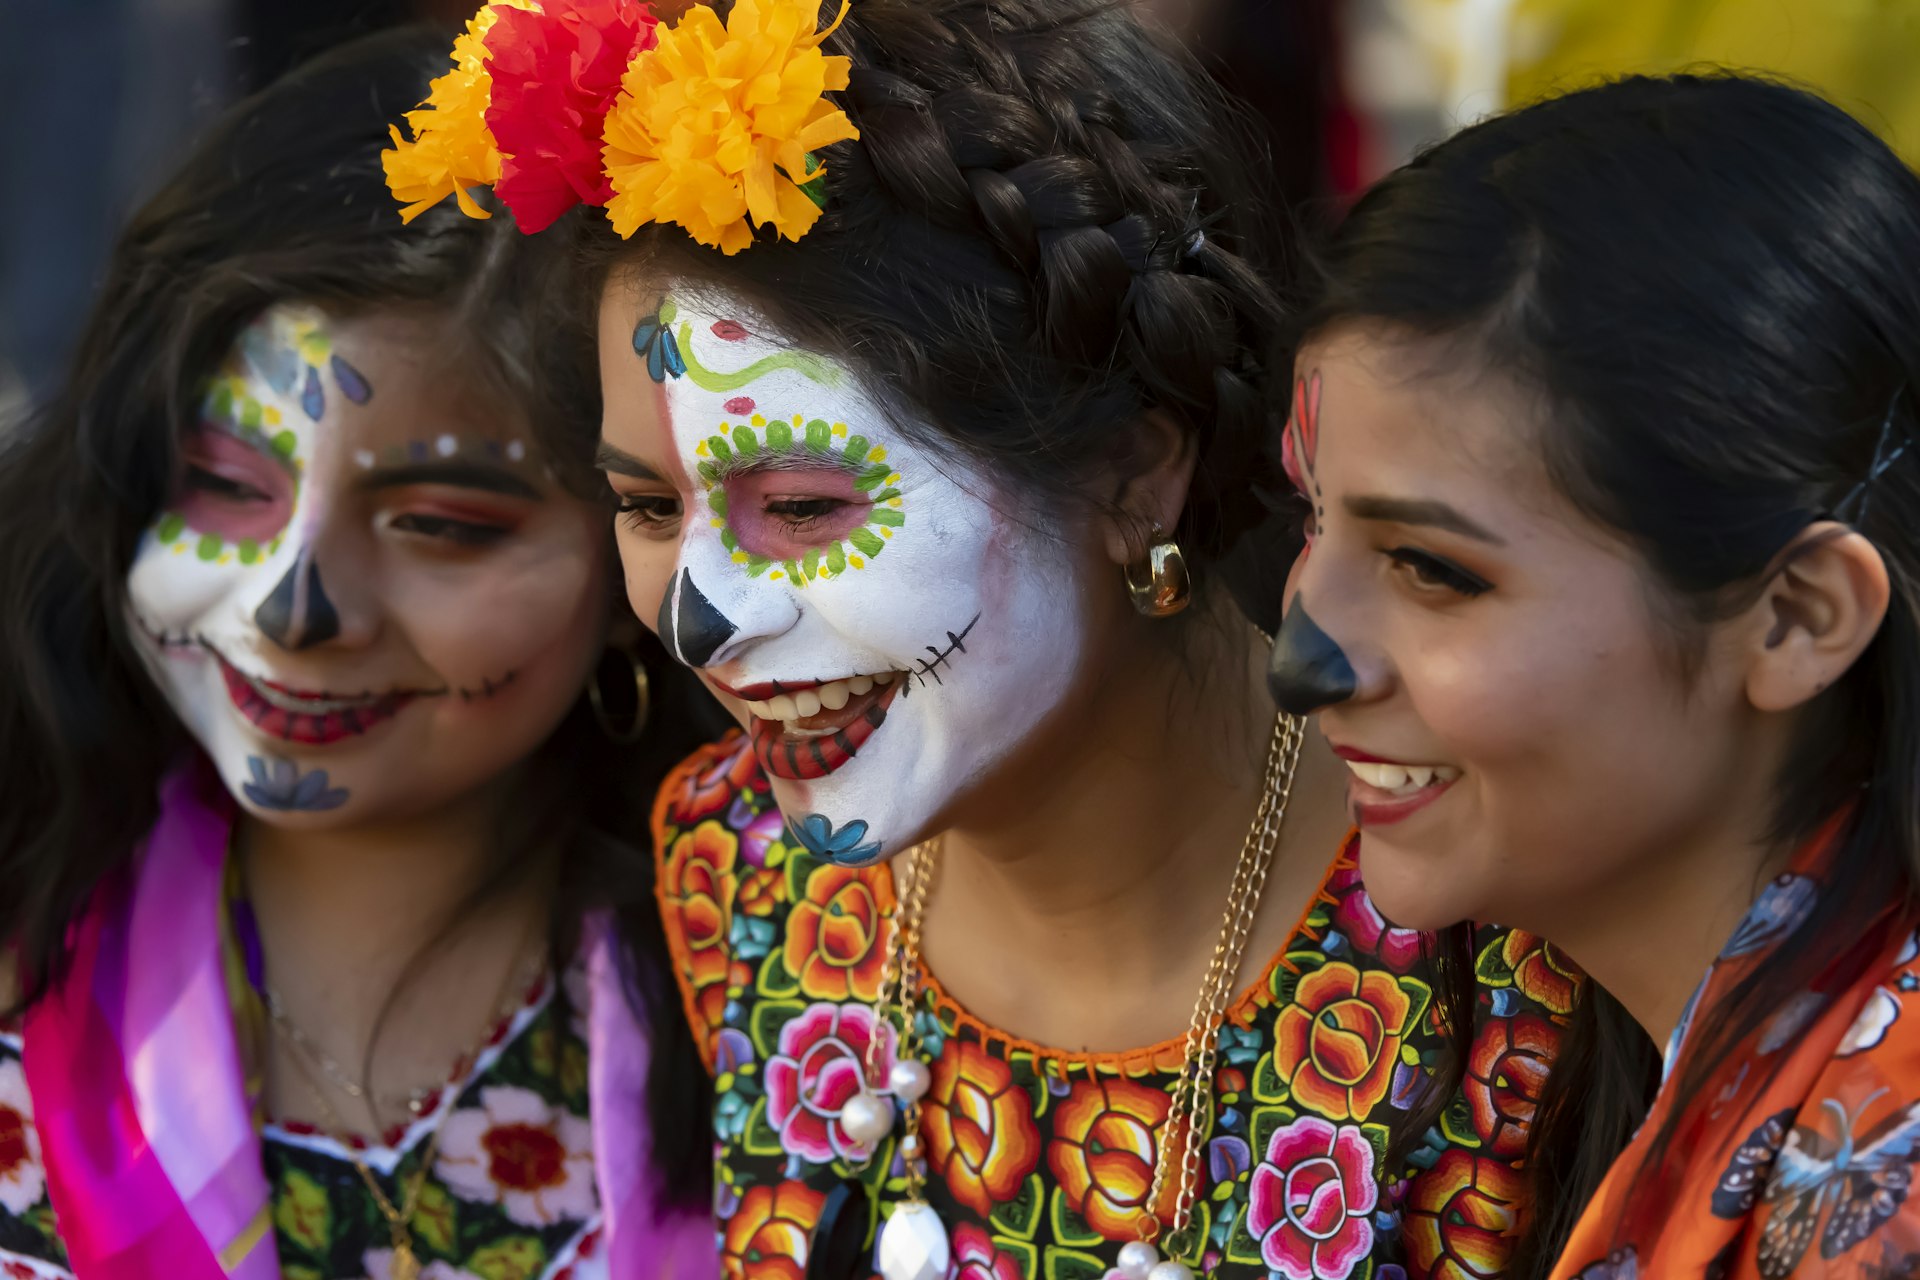 Three friends with painted faces laugh together at the Dia de los Muertos Festival in Oaxaca